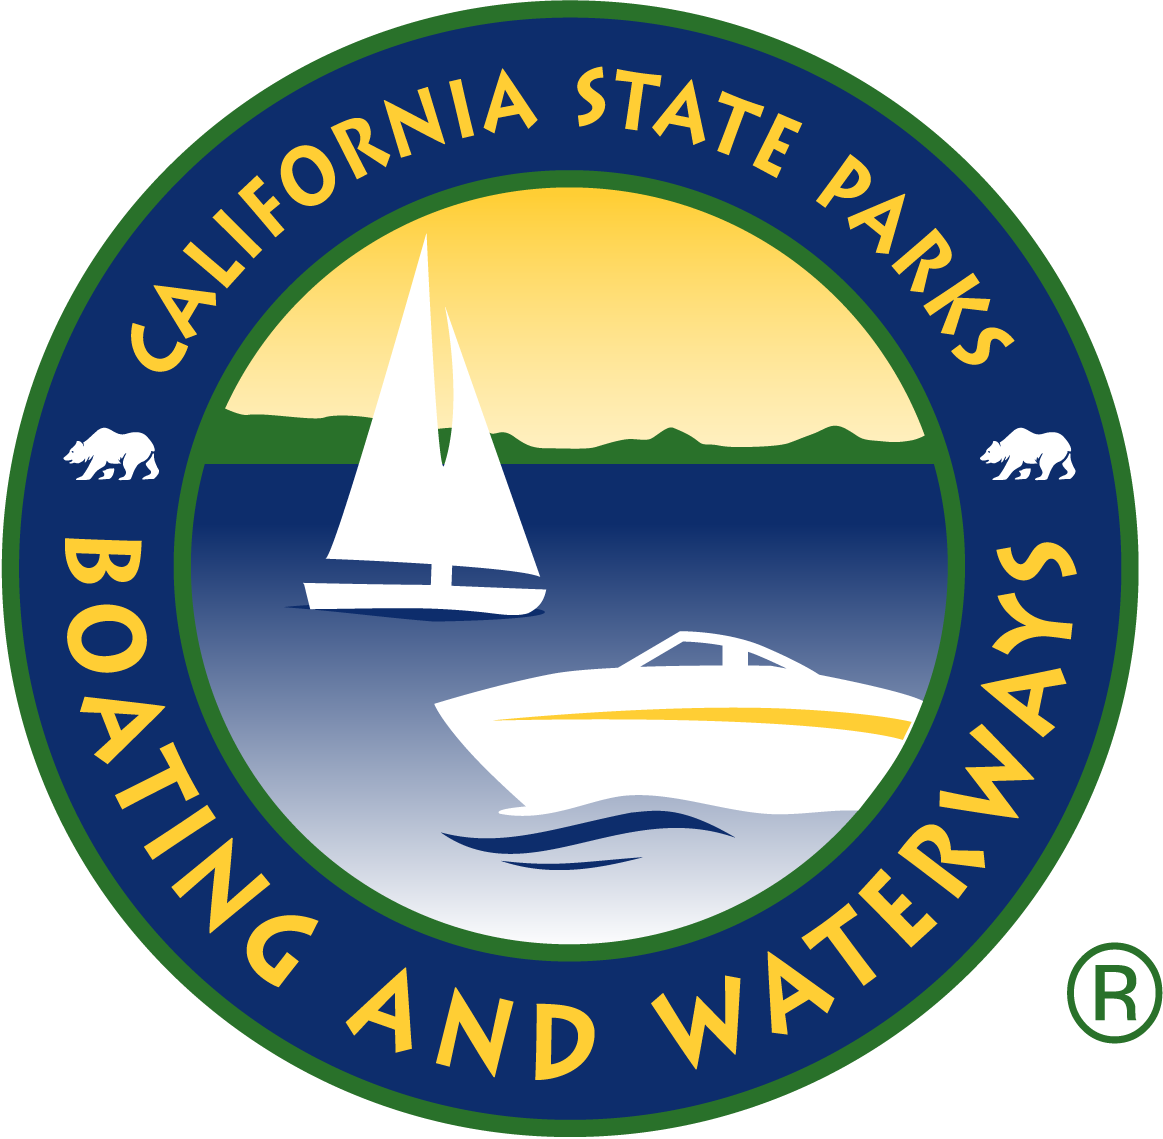 California State Parks Division of Boating and Waterways